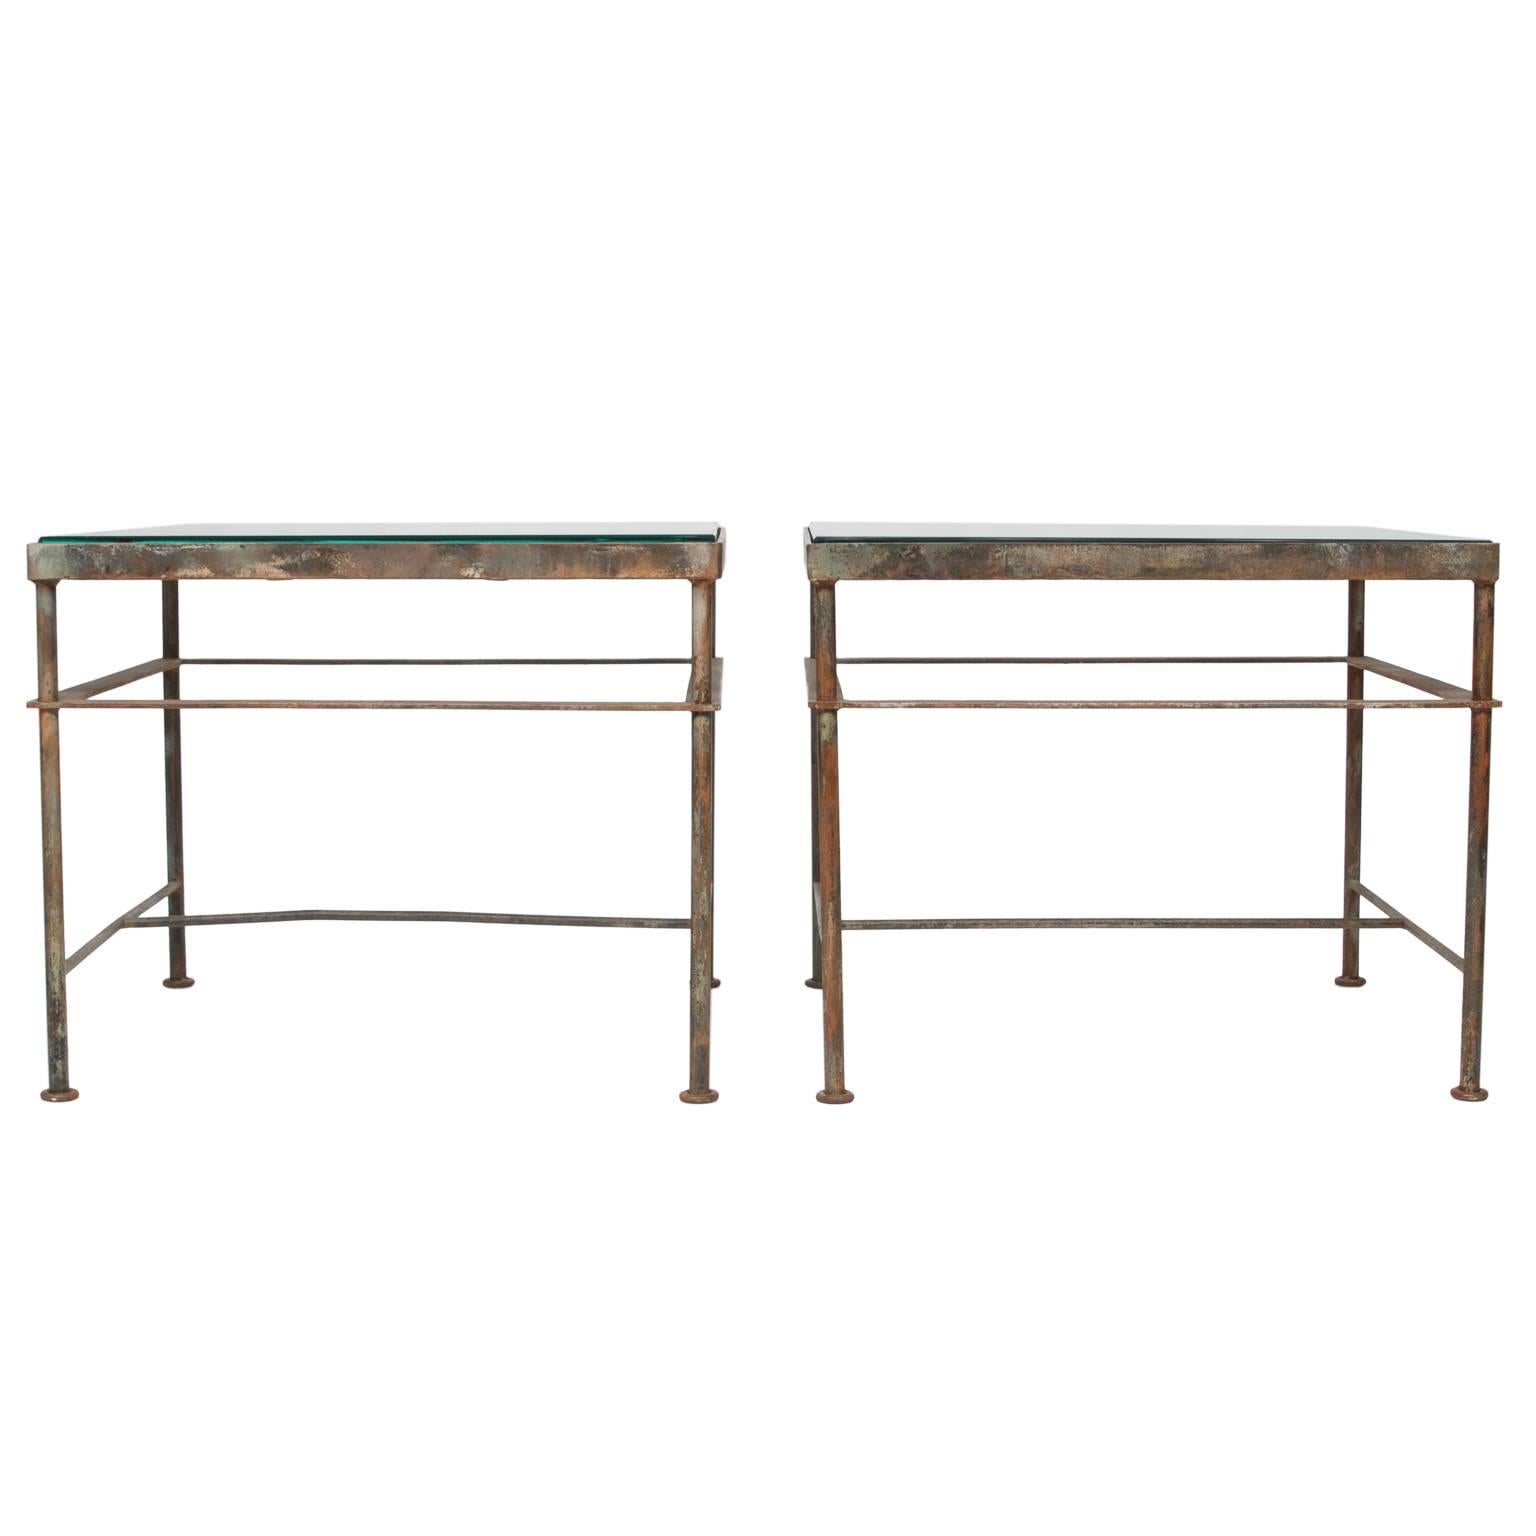 A fine pair of iron side tables with glass top. The scroll tops are balcony fronts from France and made into side tables by welding a heavy gauge iron frame with stretchers. The glass has a slight bevel fitting snuggly into the frame (well measured,